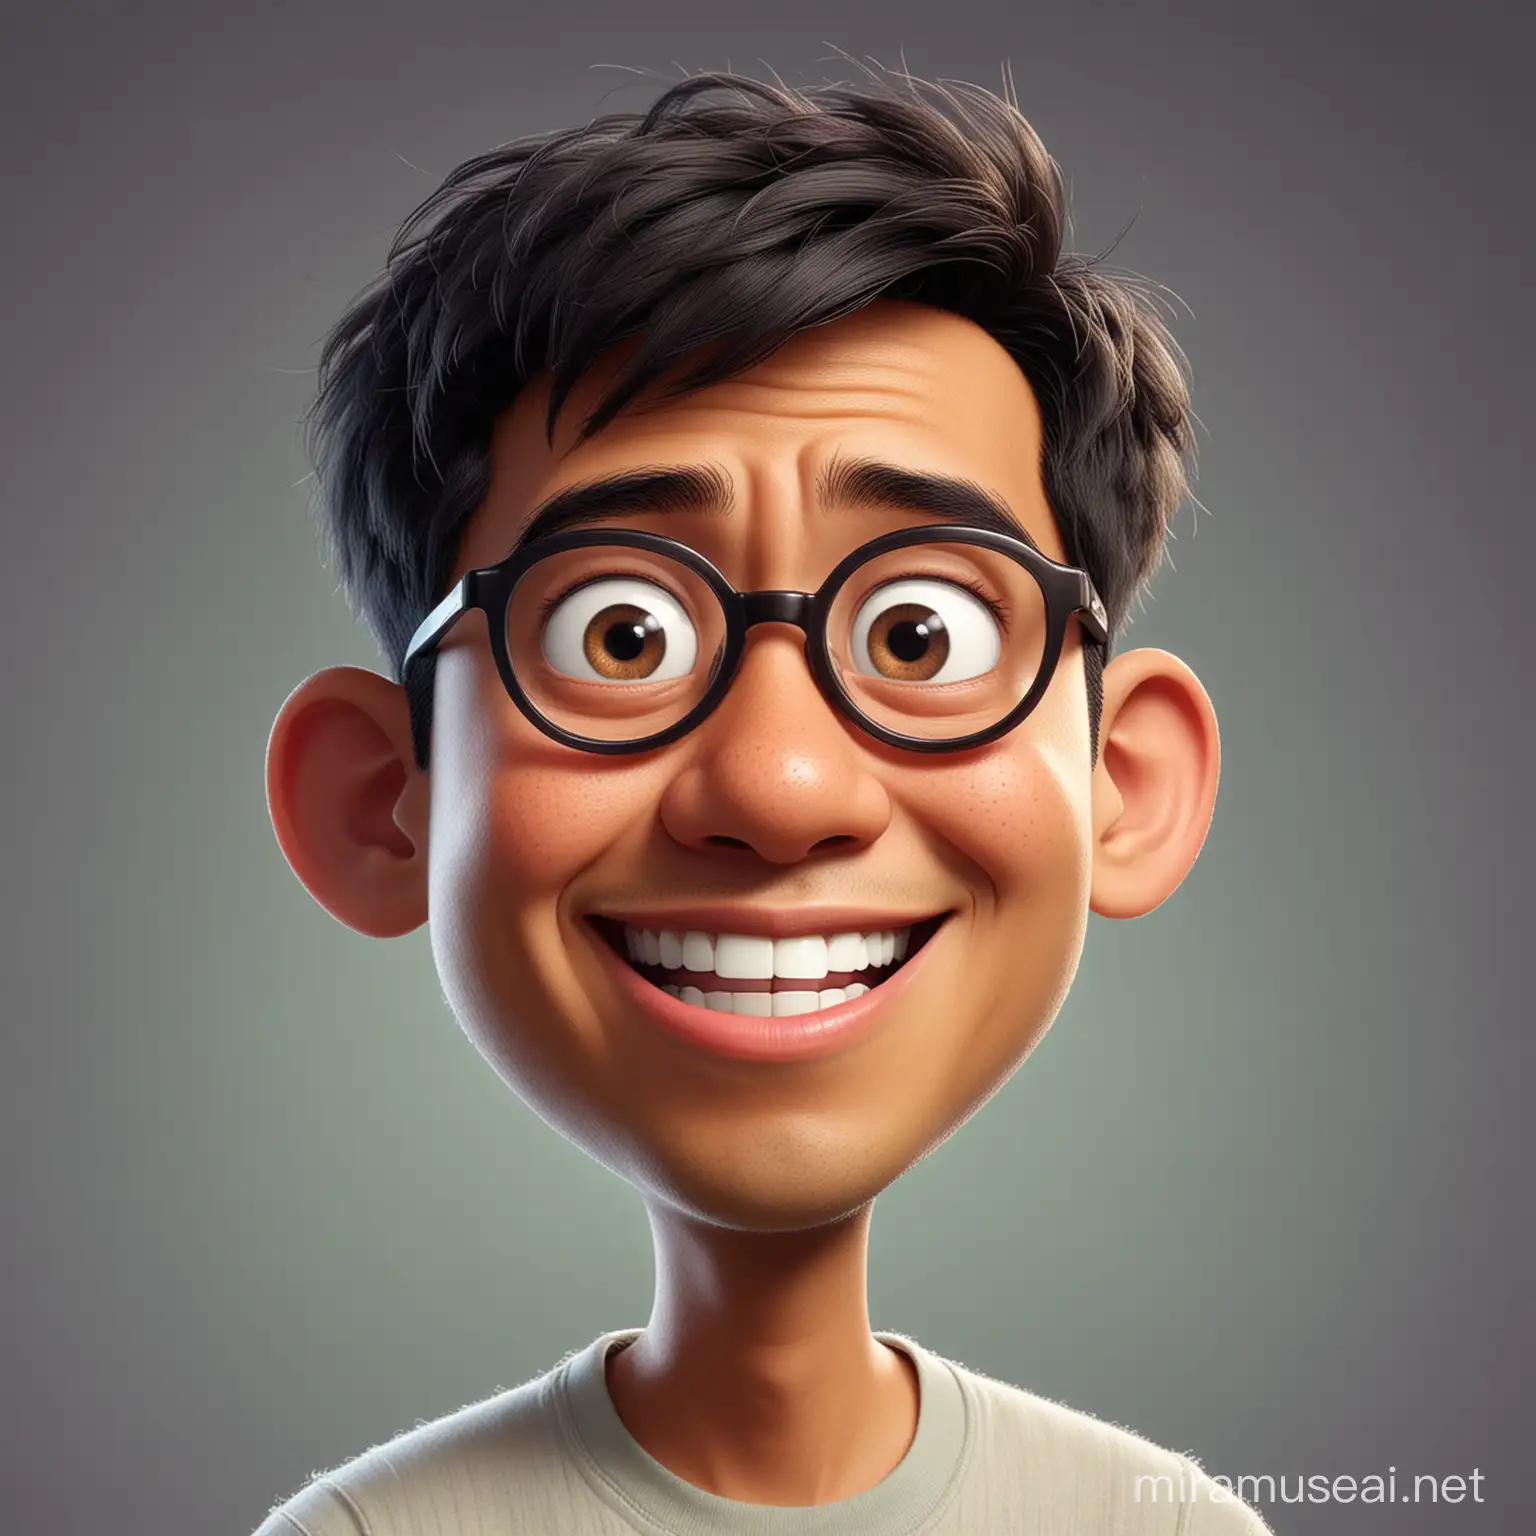 A cartoon caricature of An Indonesian man, wearing glasses, short thin hair,  and making funny faces in the style of Pixar.
